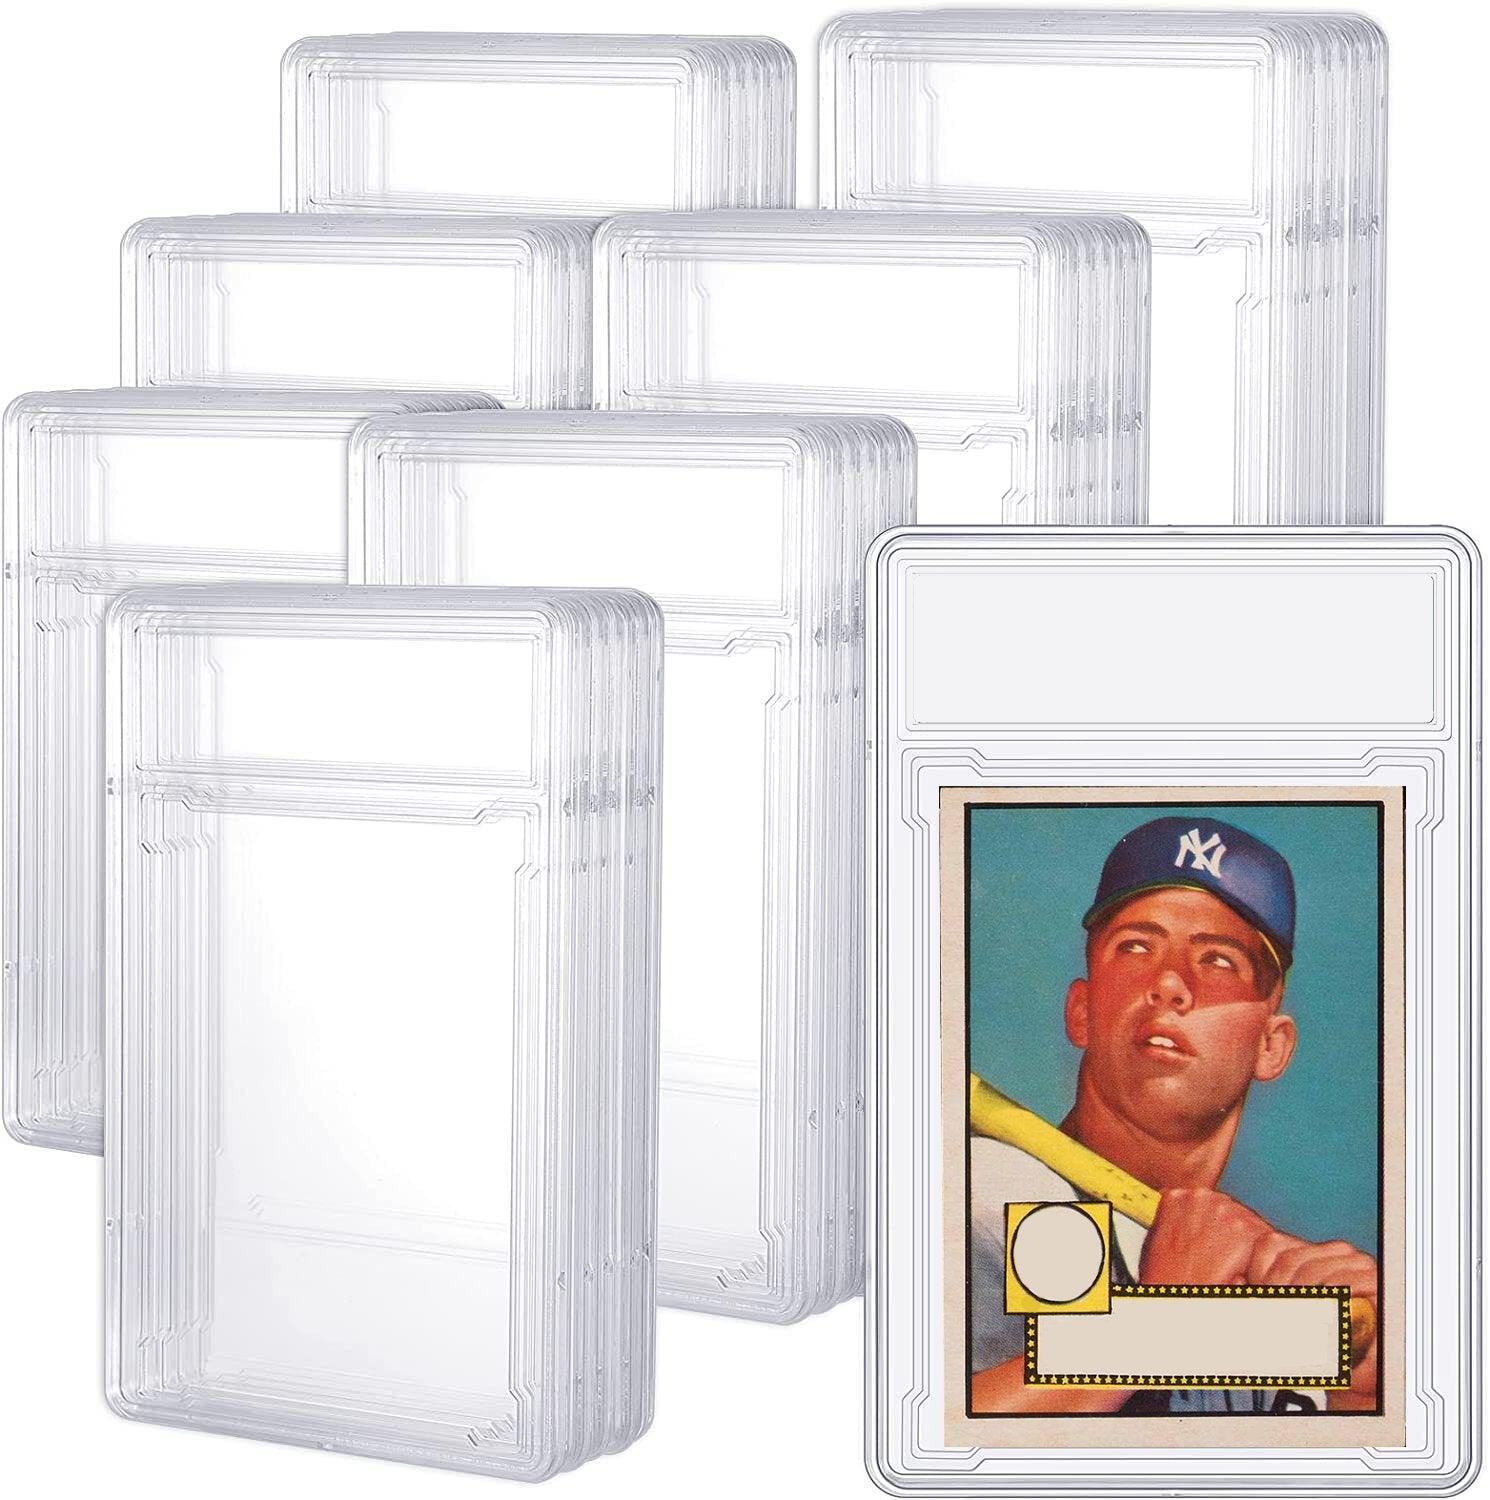 Empty Booster Pack Trading Card Slabs for Grading And Protection